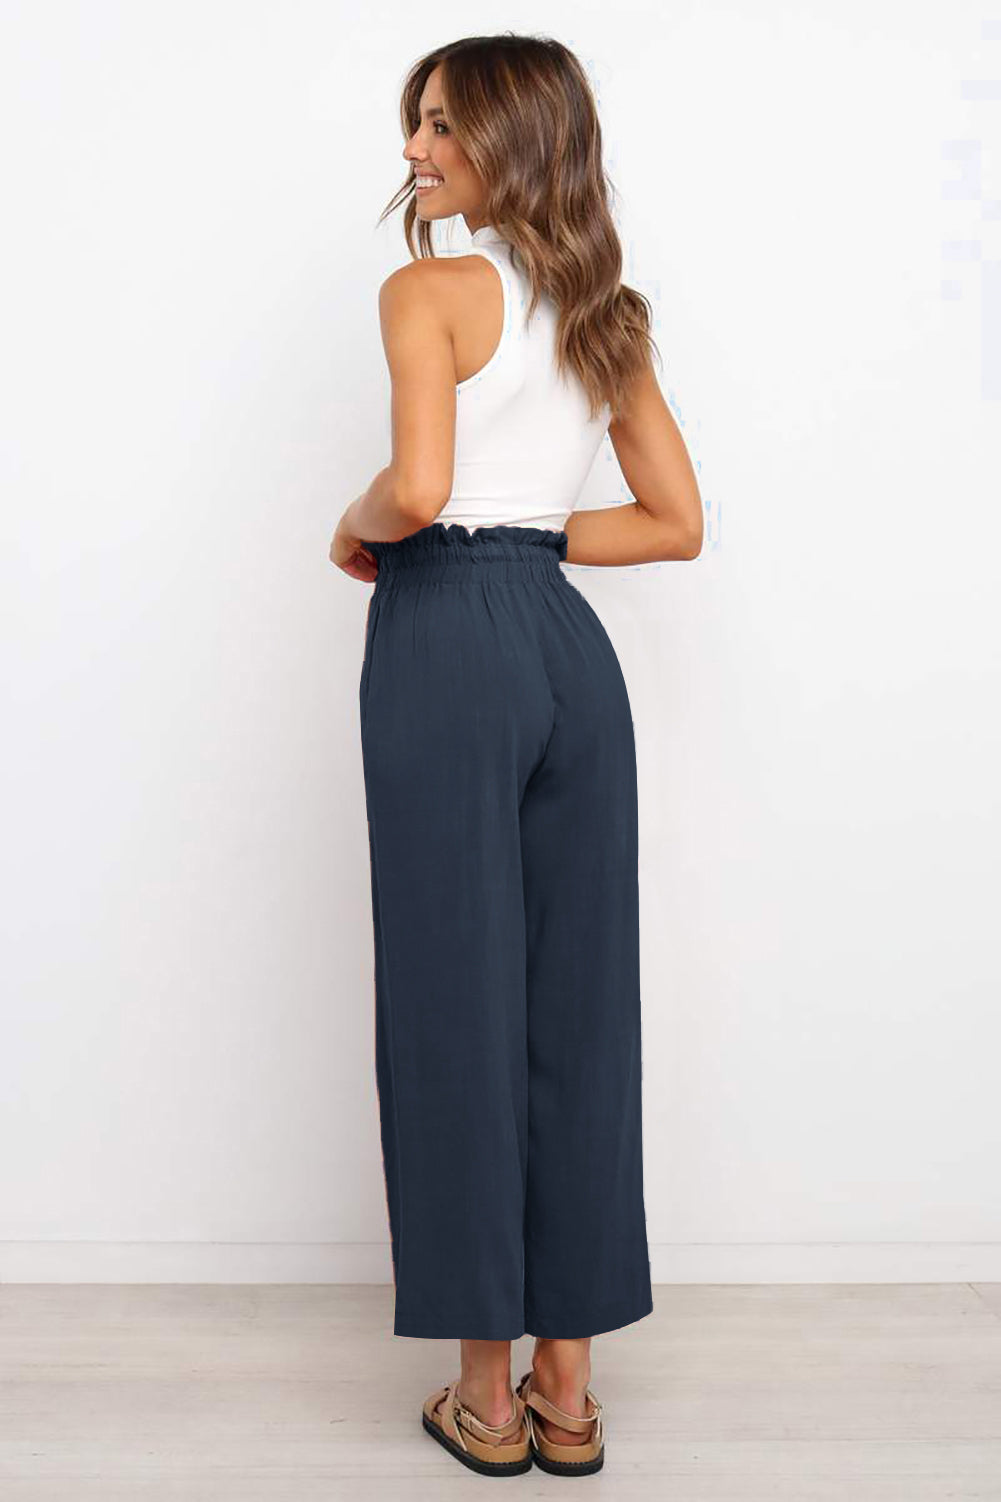 LC771296-5-S, LC771296-5-M, LC771296-5-L, LC771296-5-XL, Blue Women's High Waist Paper Bag Straight Leg Cropped Long Pants with Pocket